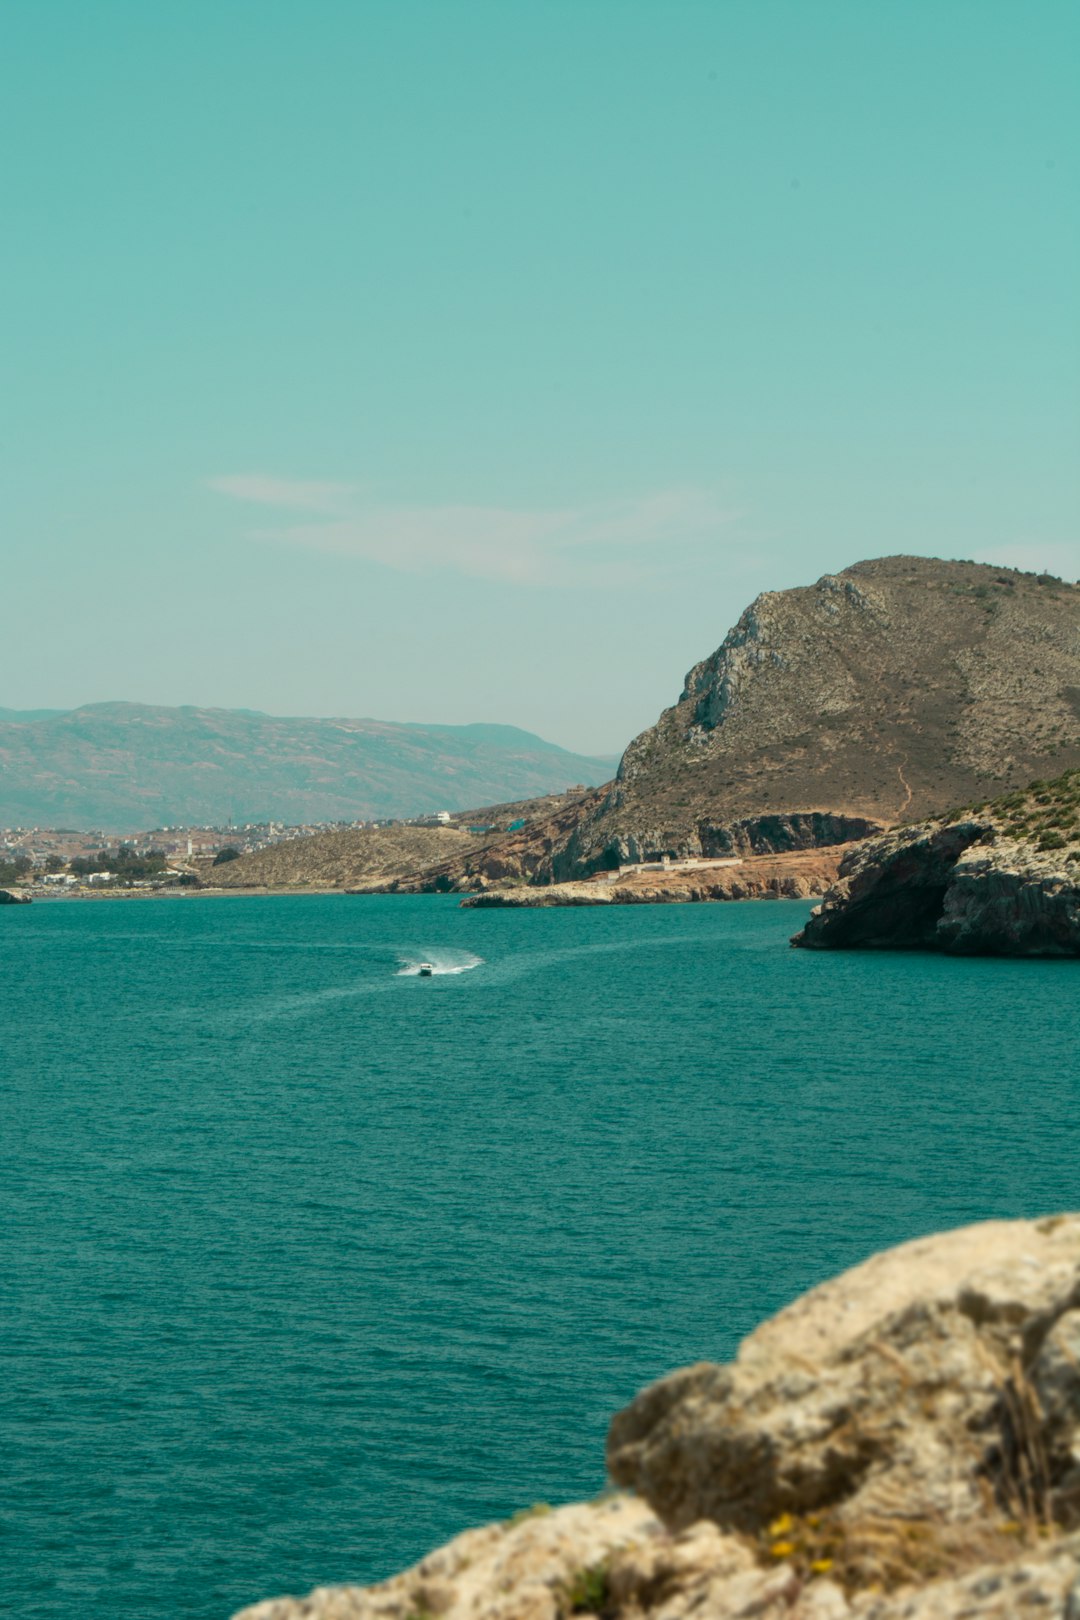 Travel Tips and Stories of Al Hoceima in Morocco